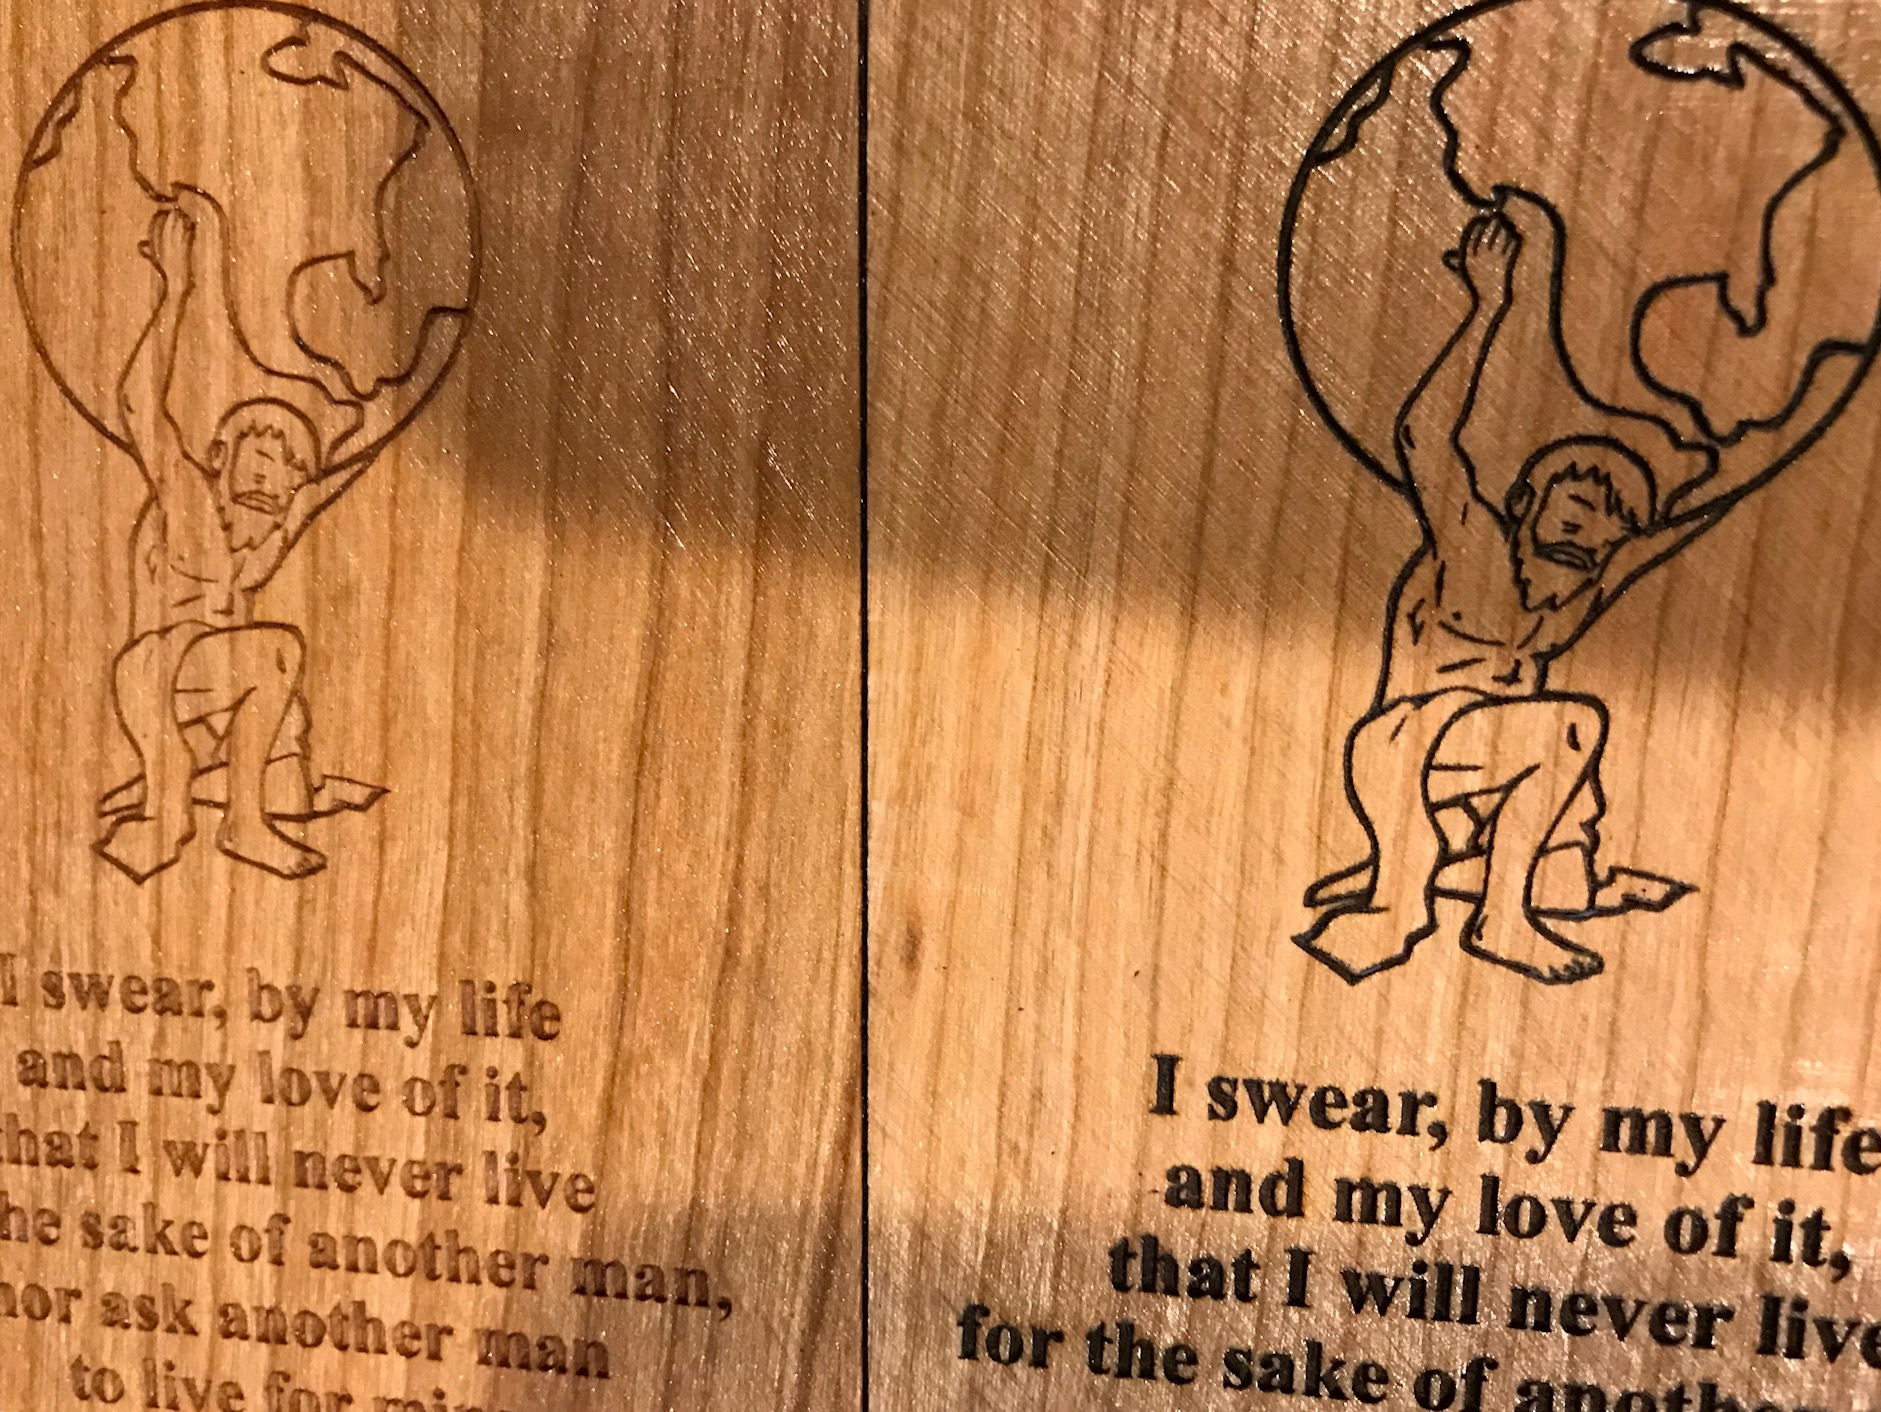 Thin Alder Wood For Laser Engraving/Cutting - What is the best